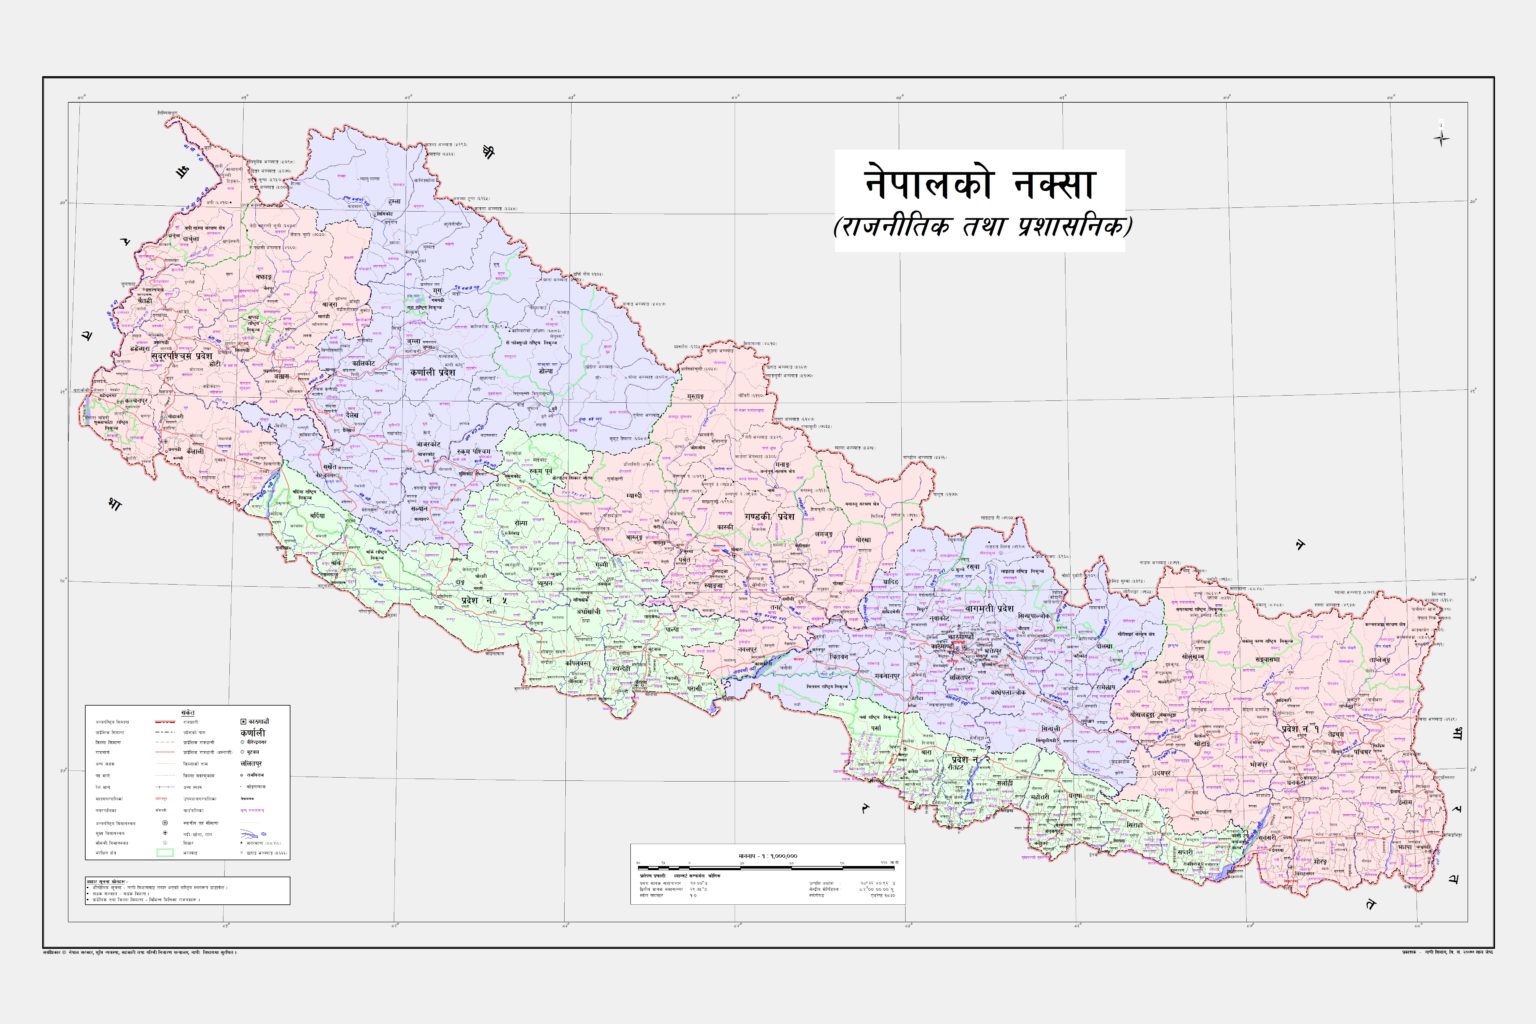 Nepal’s revised map sent to United Nations